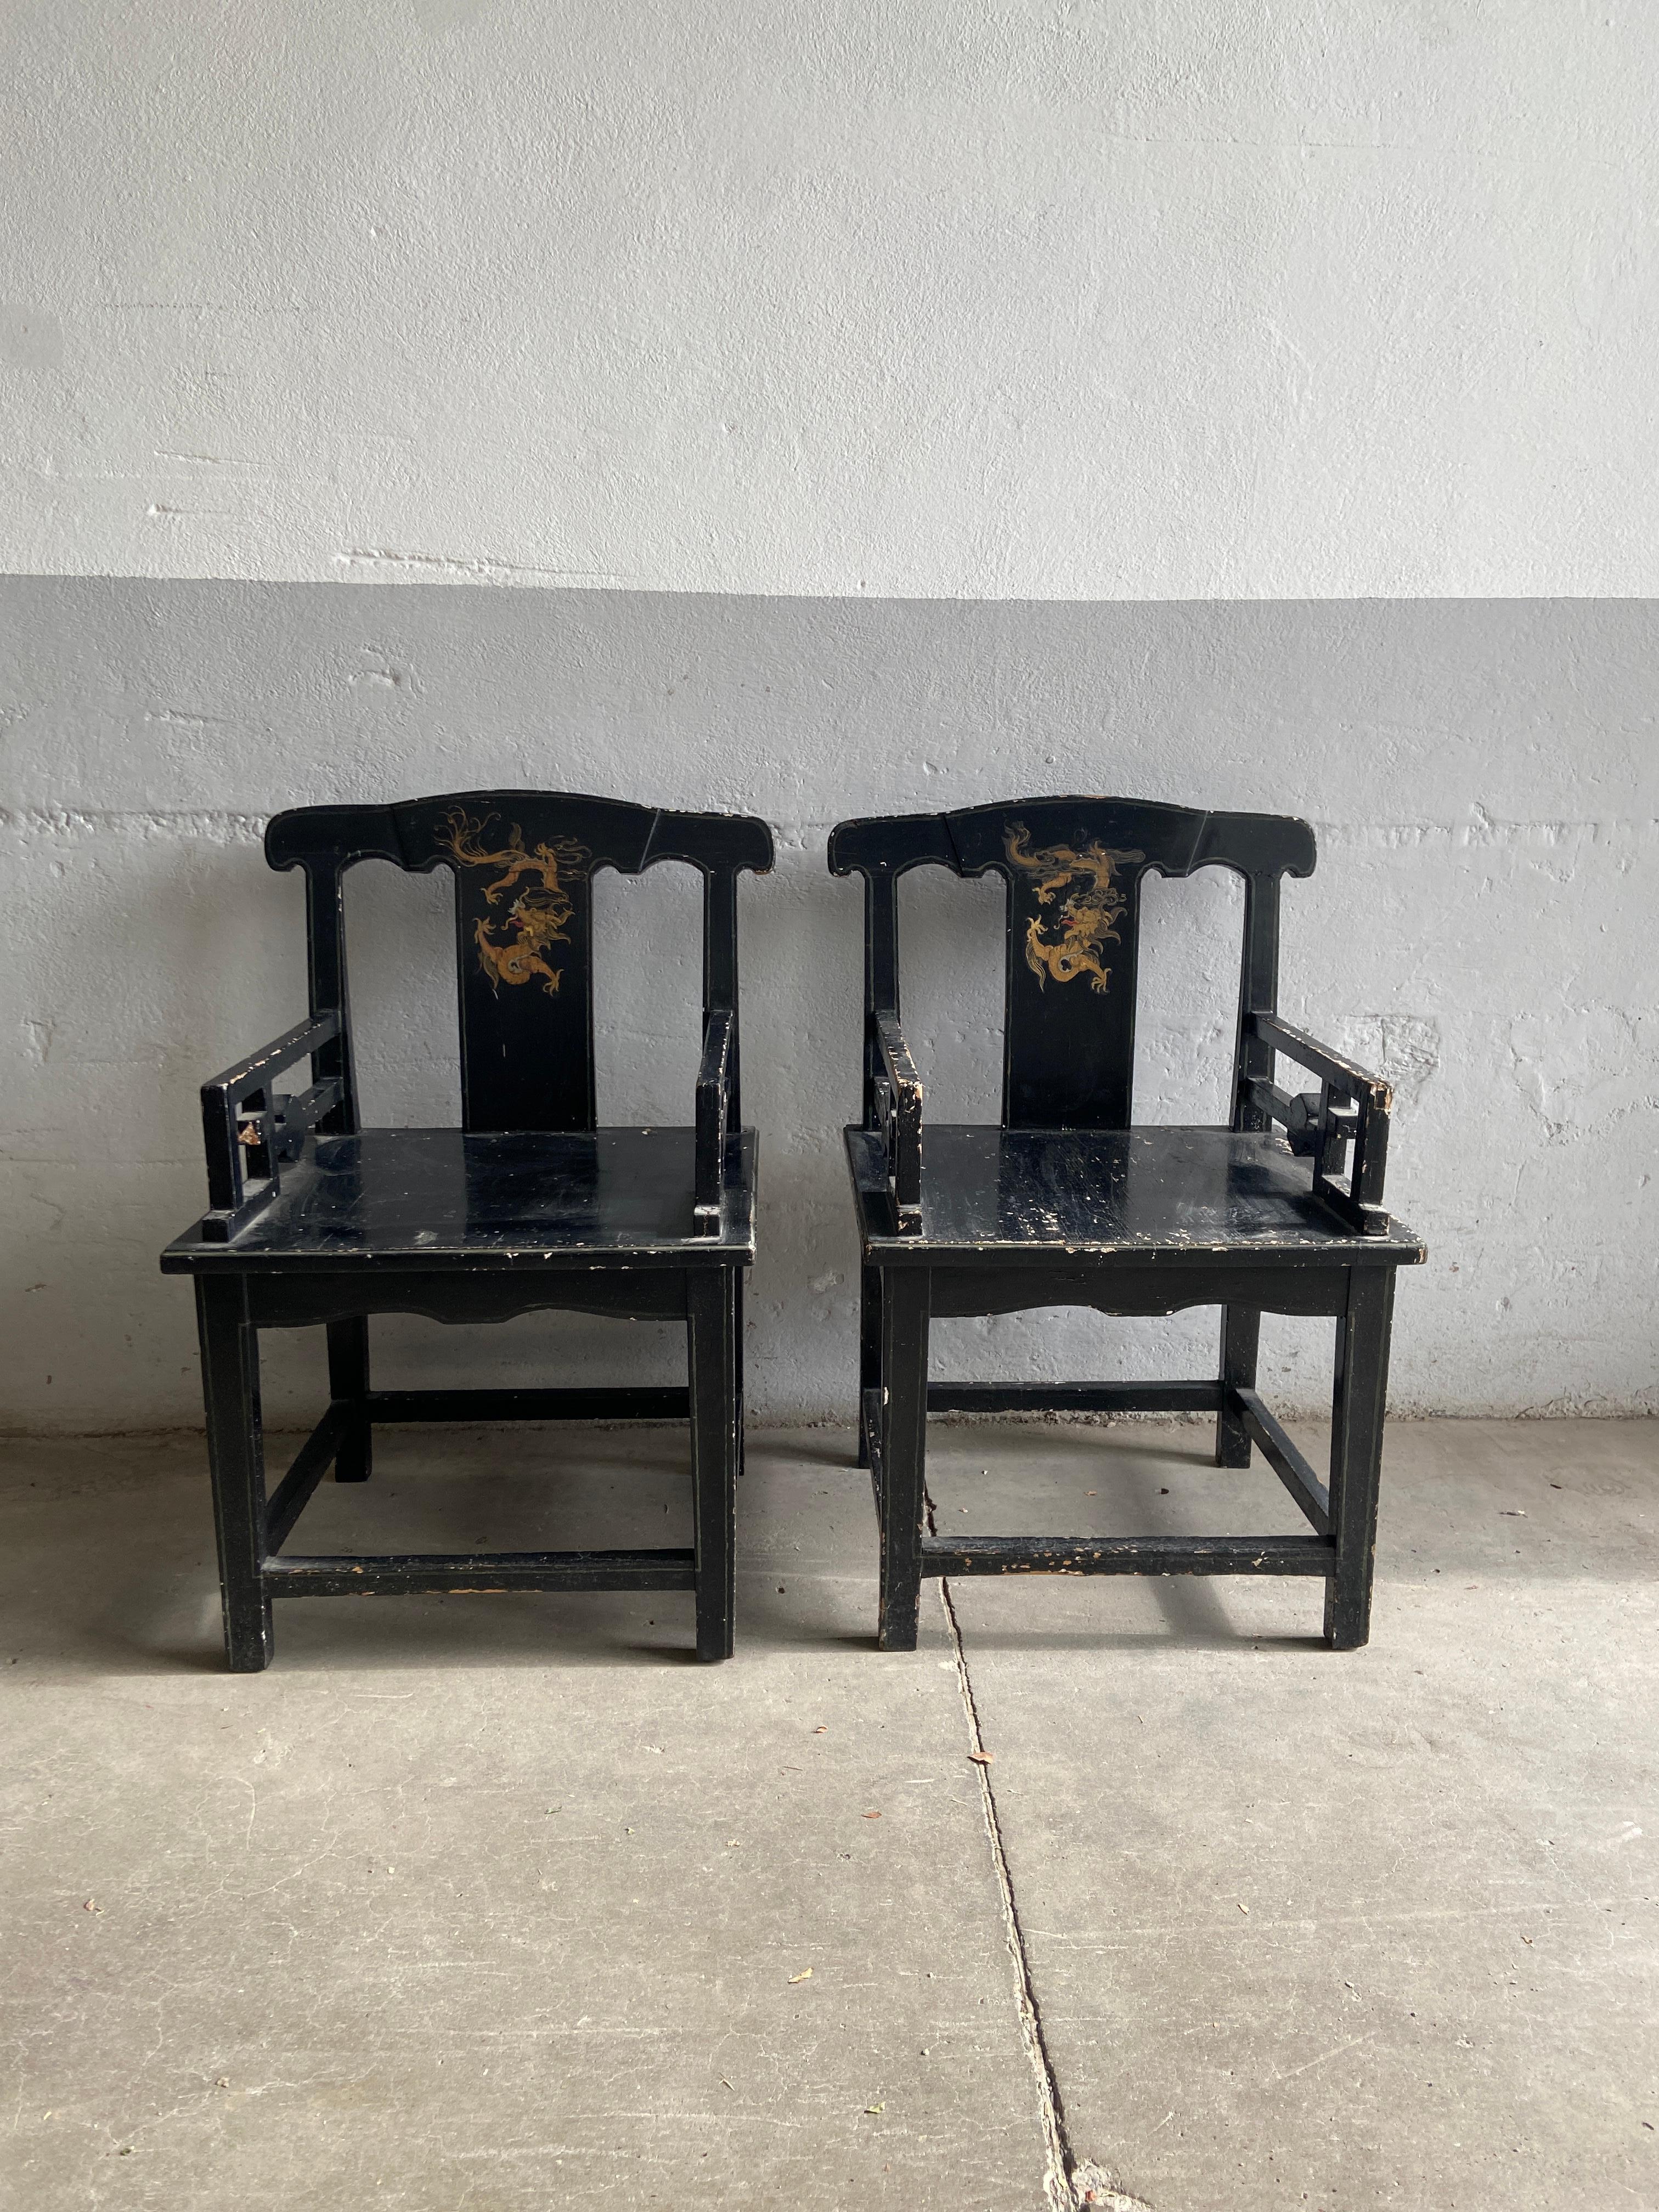 Pair of Chinese armchair in lacquered black wood with gold and red hand painted decorations.
This item has a wonderful patina due to age and use. The structure is real very solid